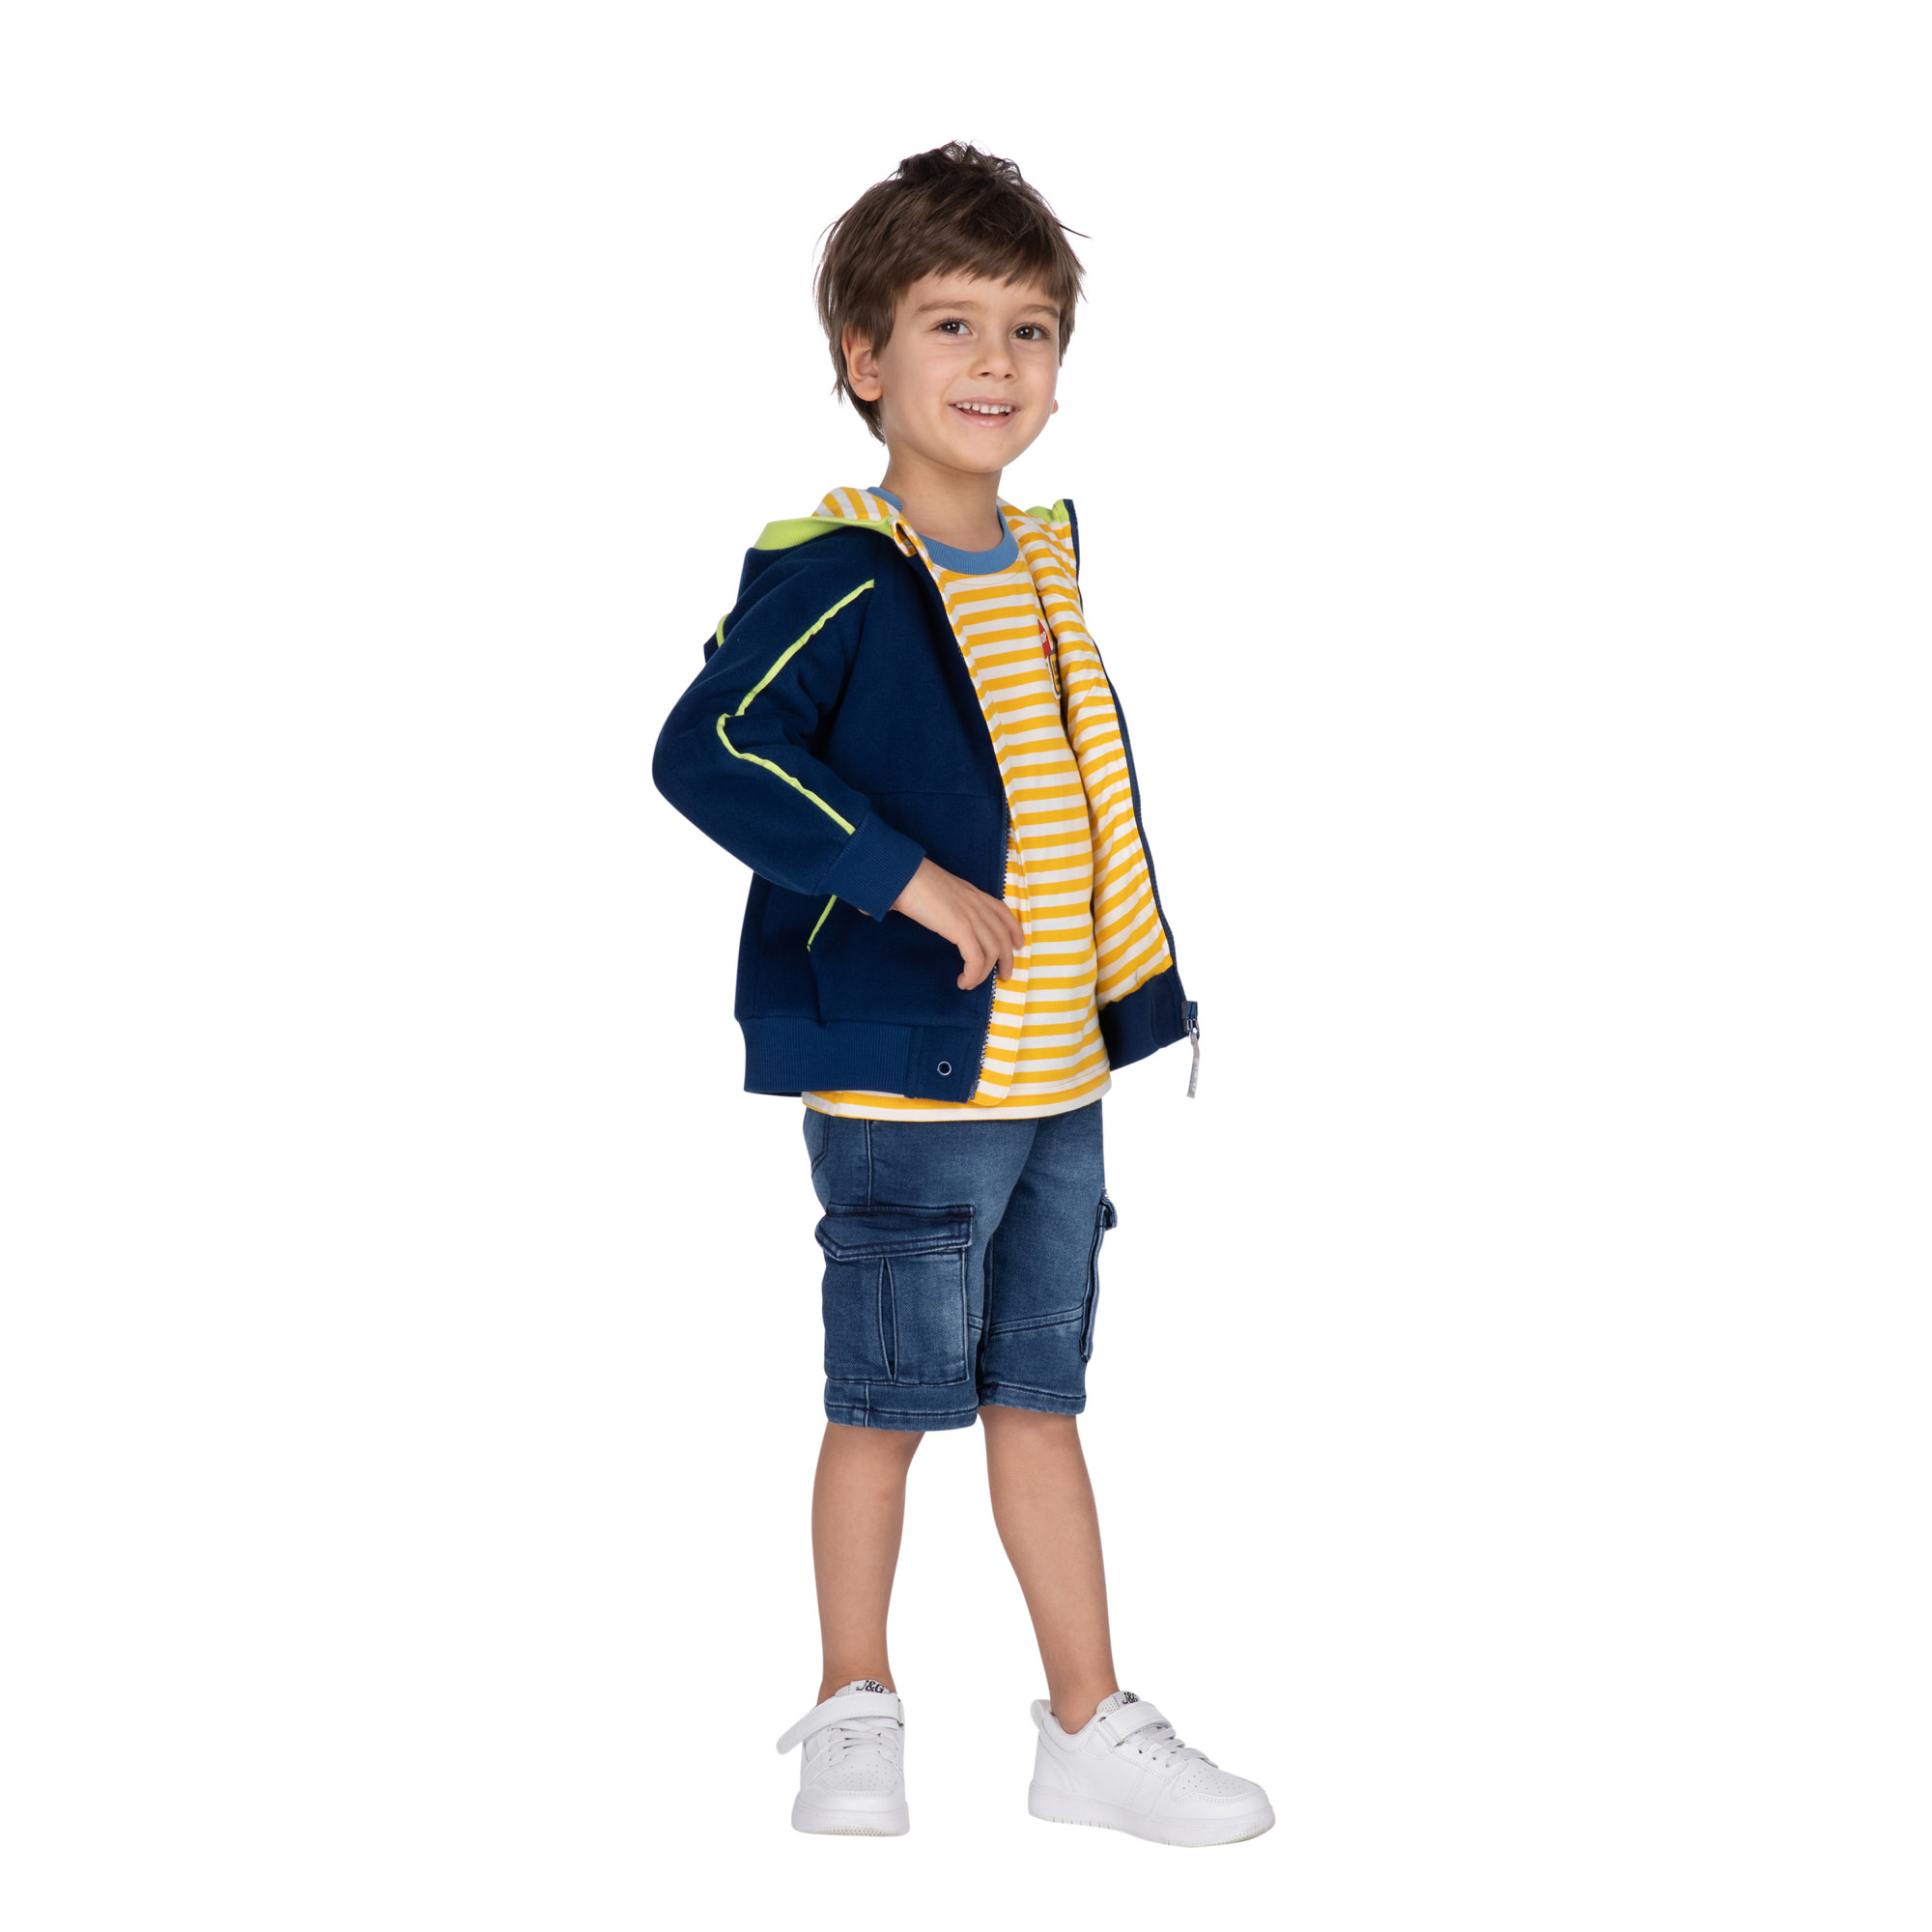 Stretchy jeans bermuda shorts for boys